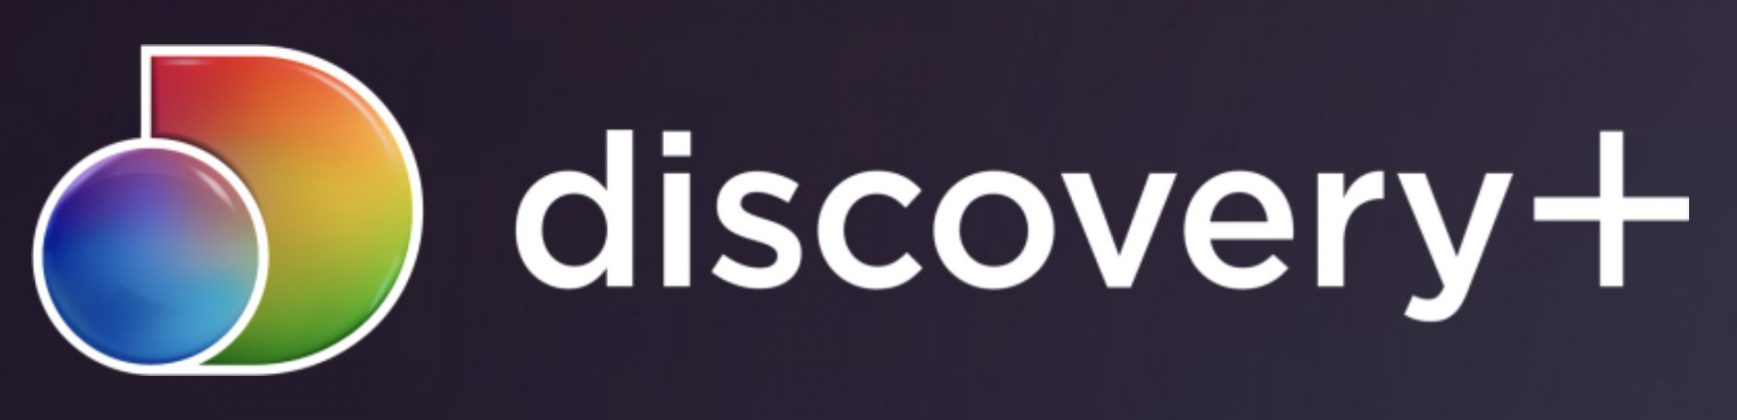 discovery plus review uk